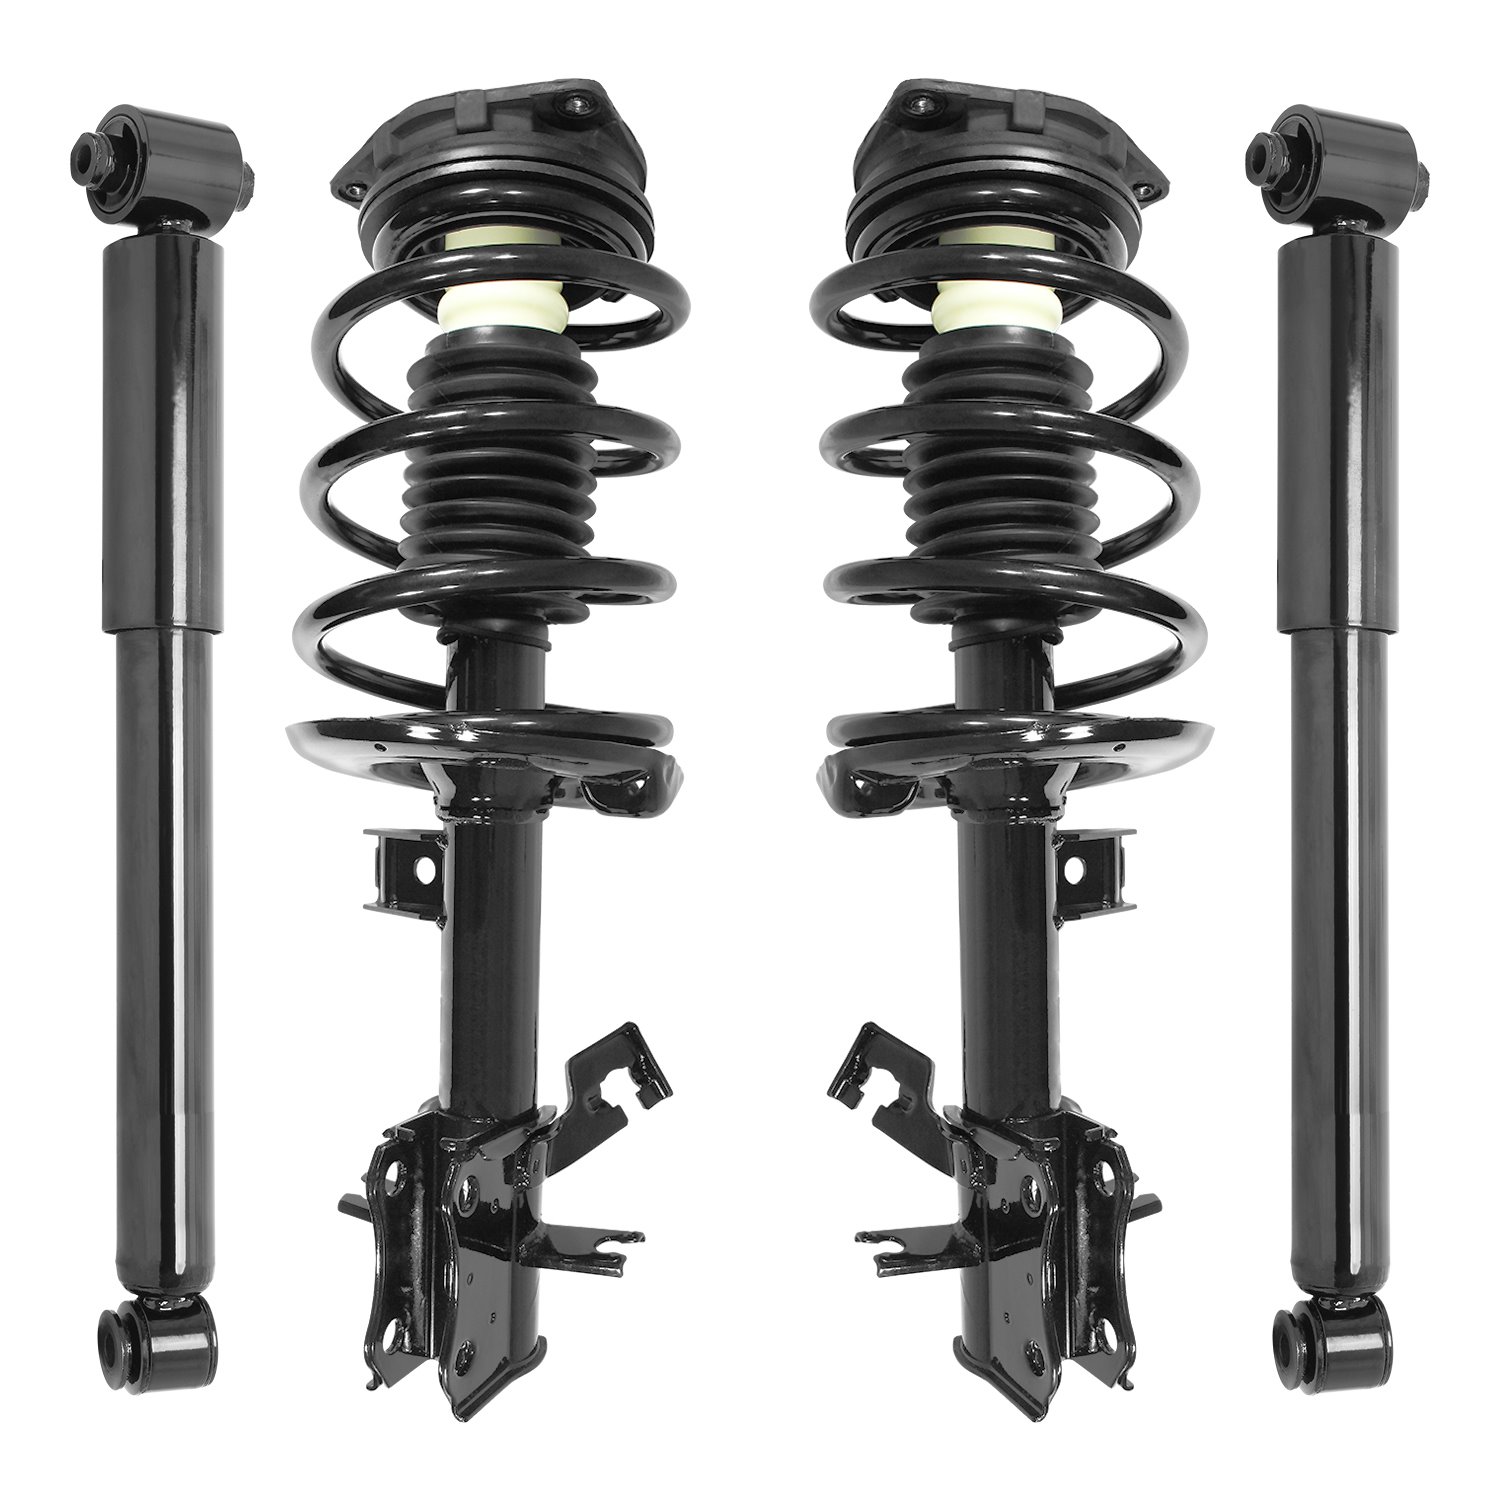 4-11453-255800-001 Front & Rear Suspension Strut & Coil Spring Assembly Fits Select Nissan Sentra